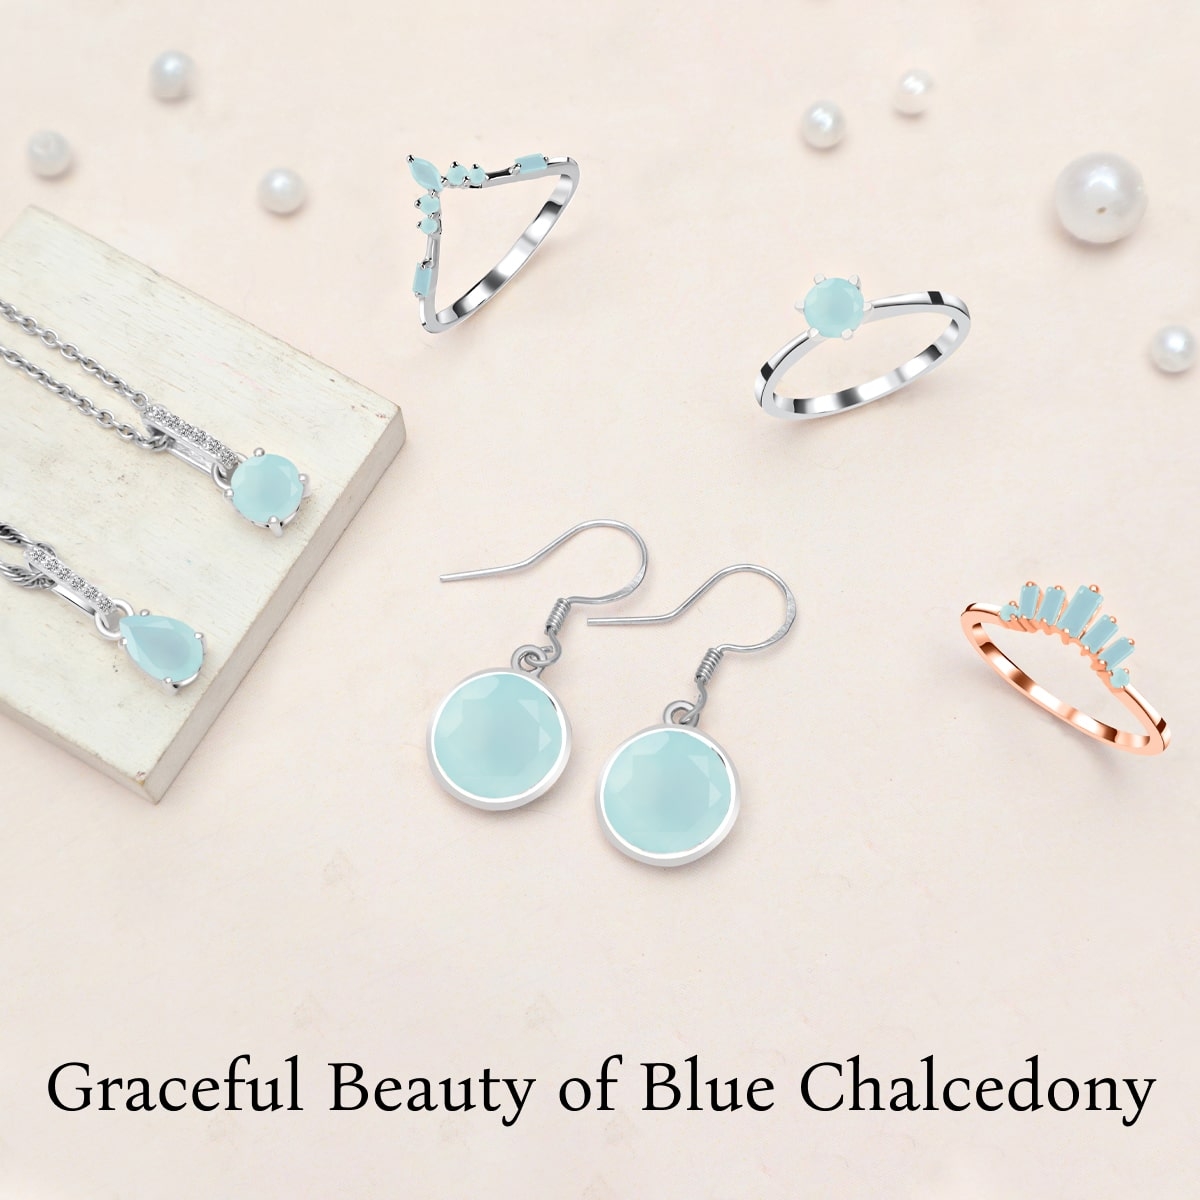 Blue Chalcedony: A Tranquil Symphony of Healing and Harmony